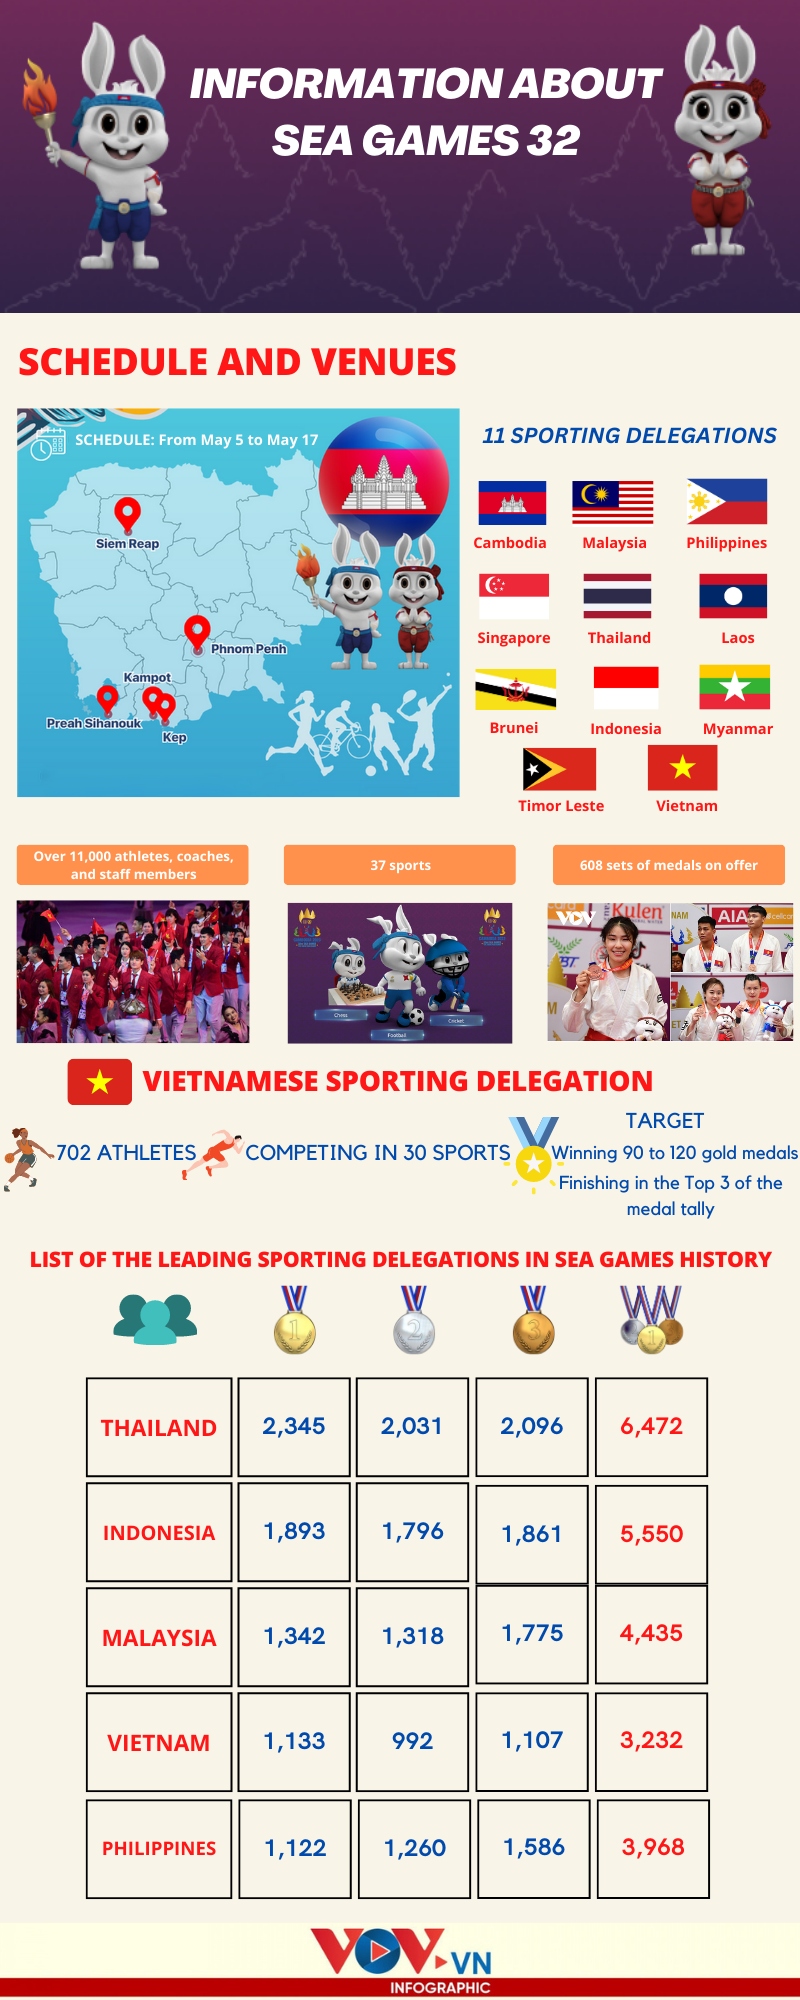 information about sea games 32 in cambodia picture 1